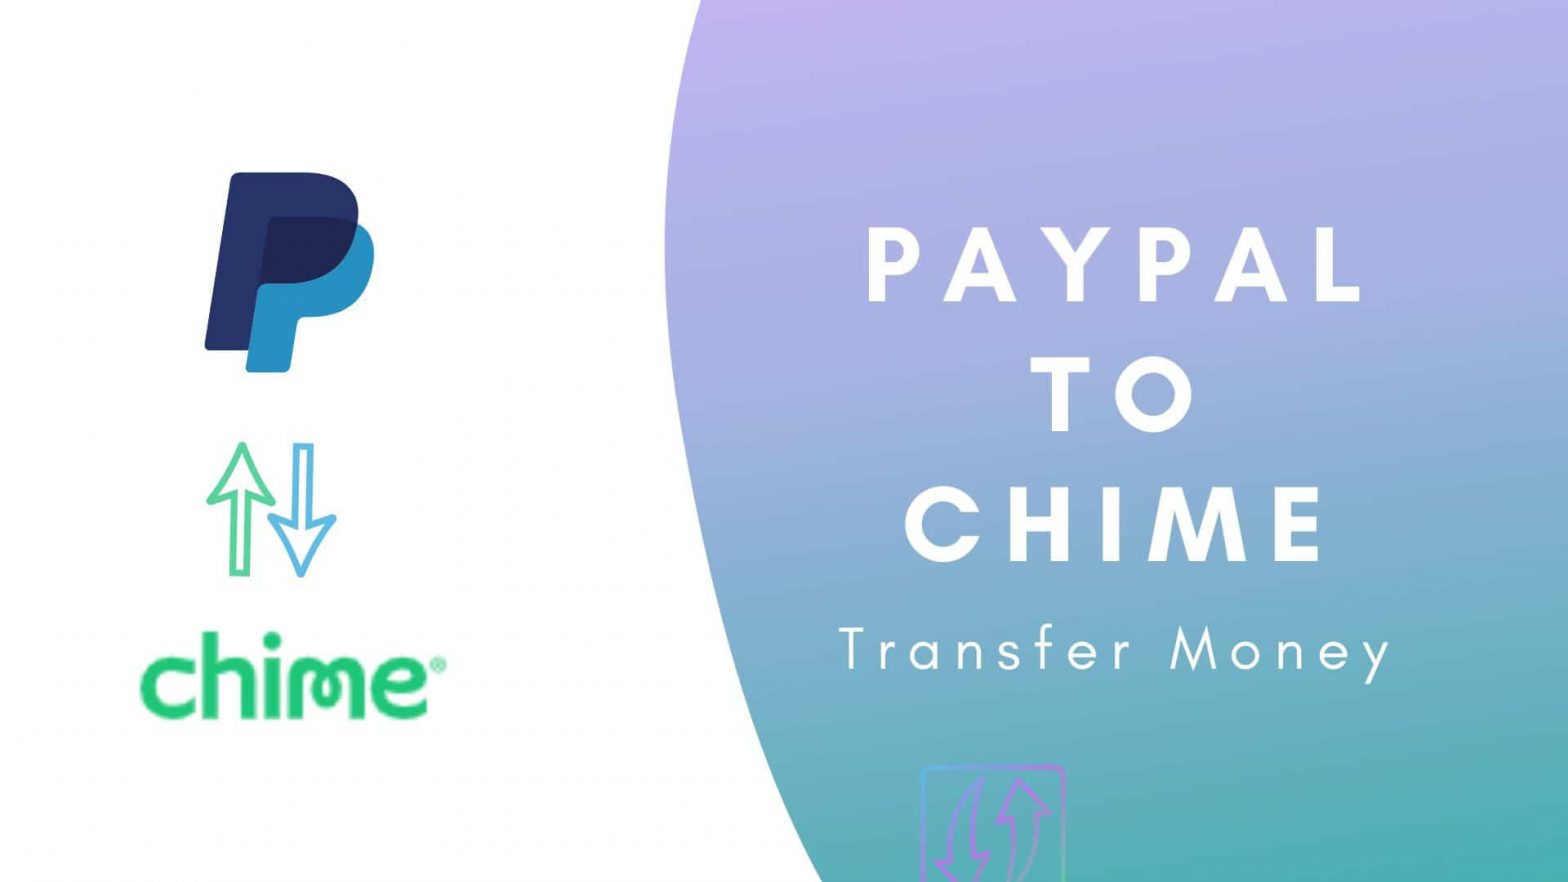 Send money from Paypal to Chime-min